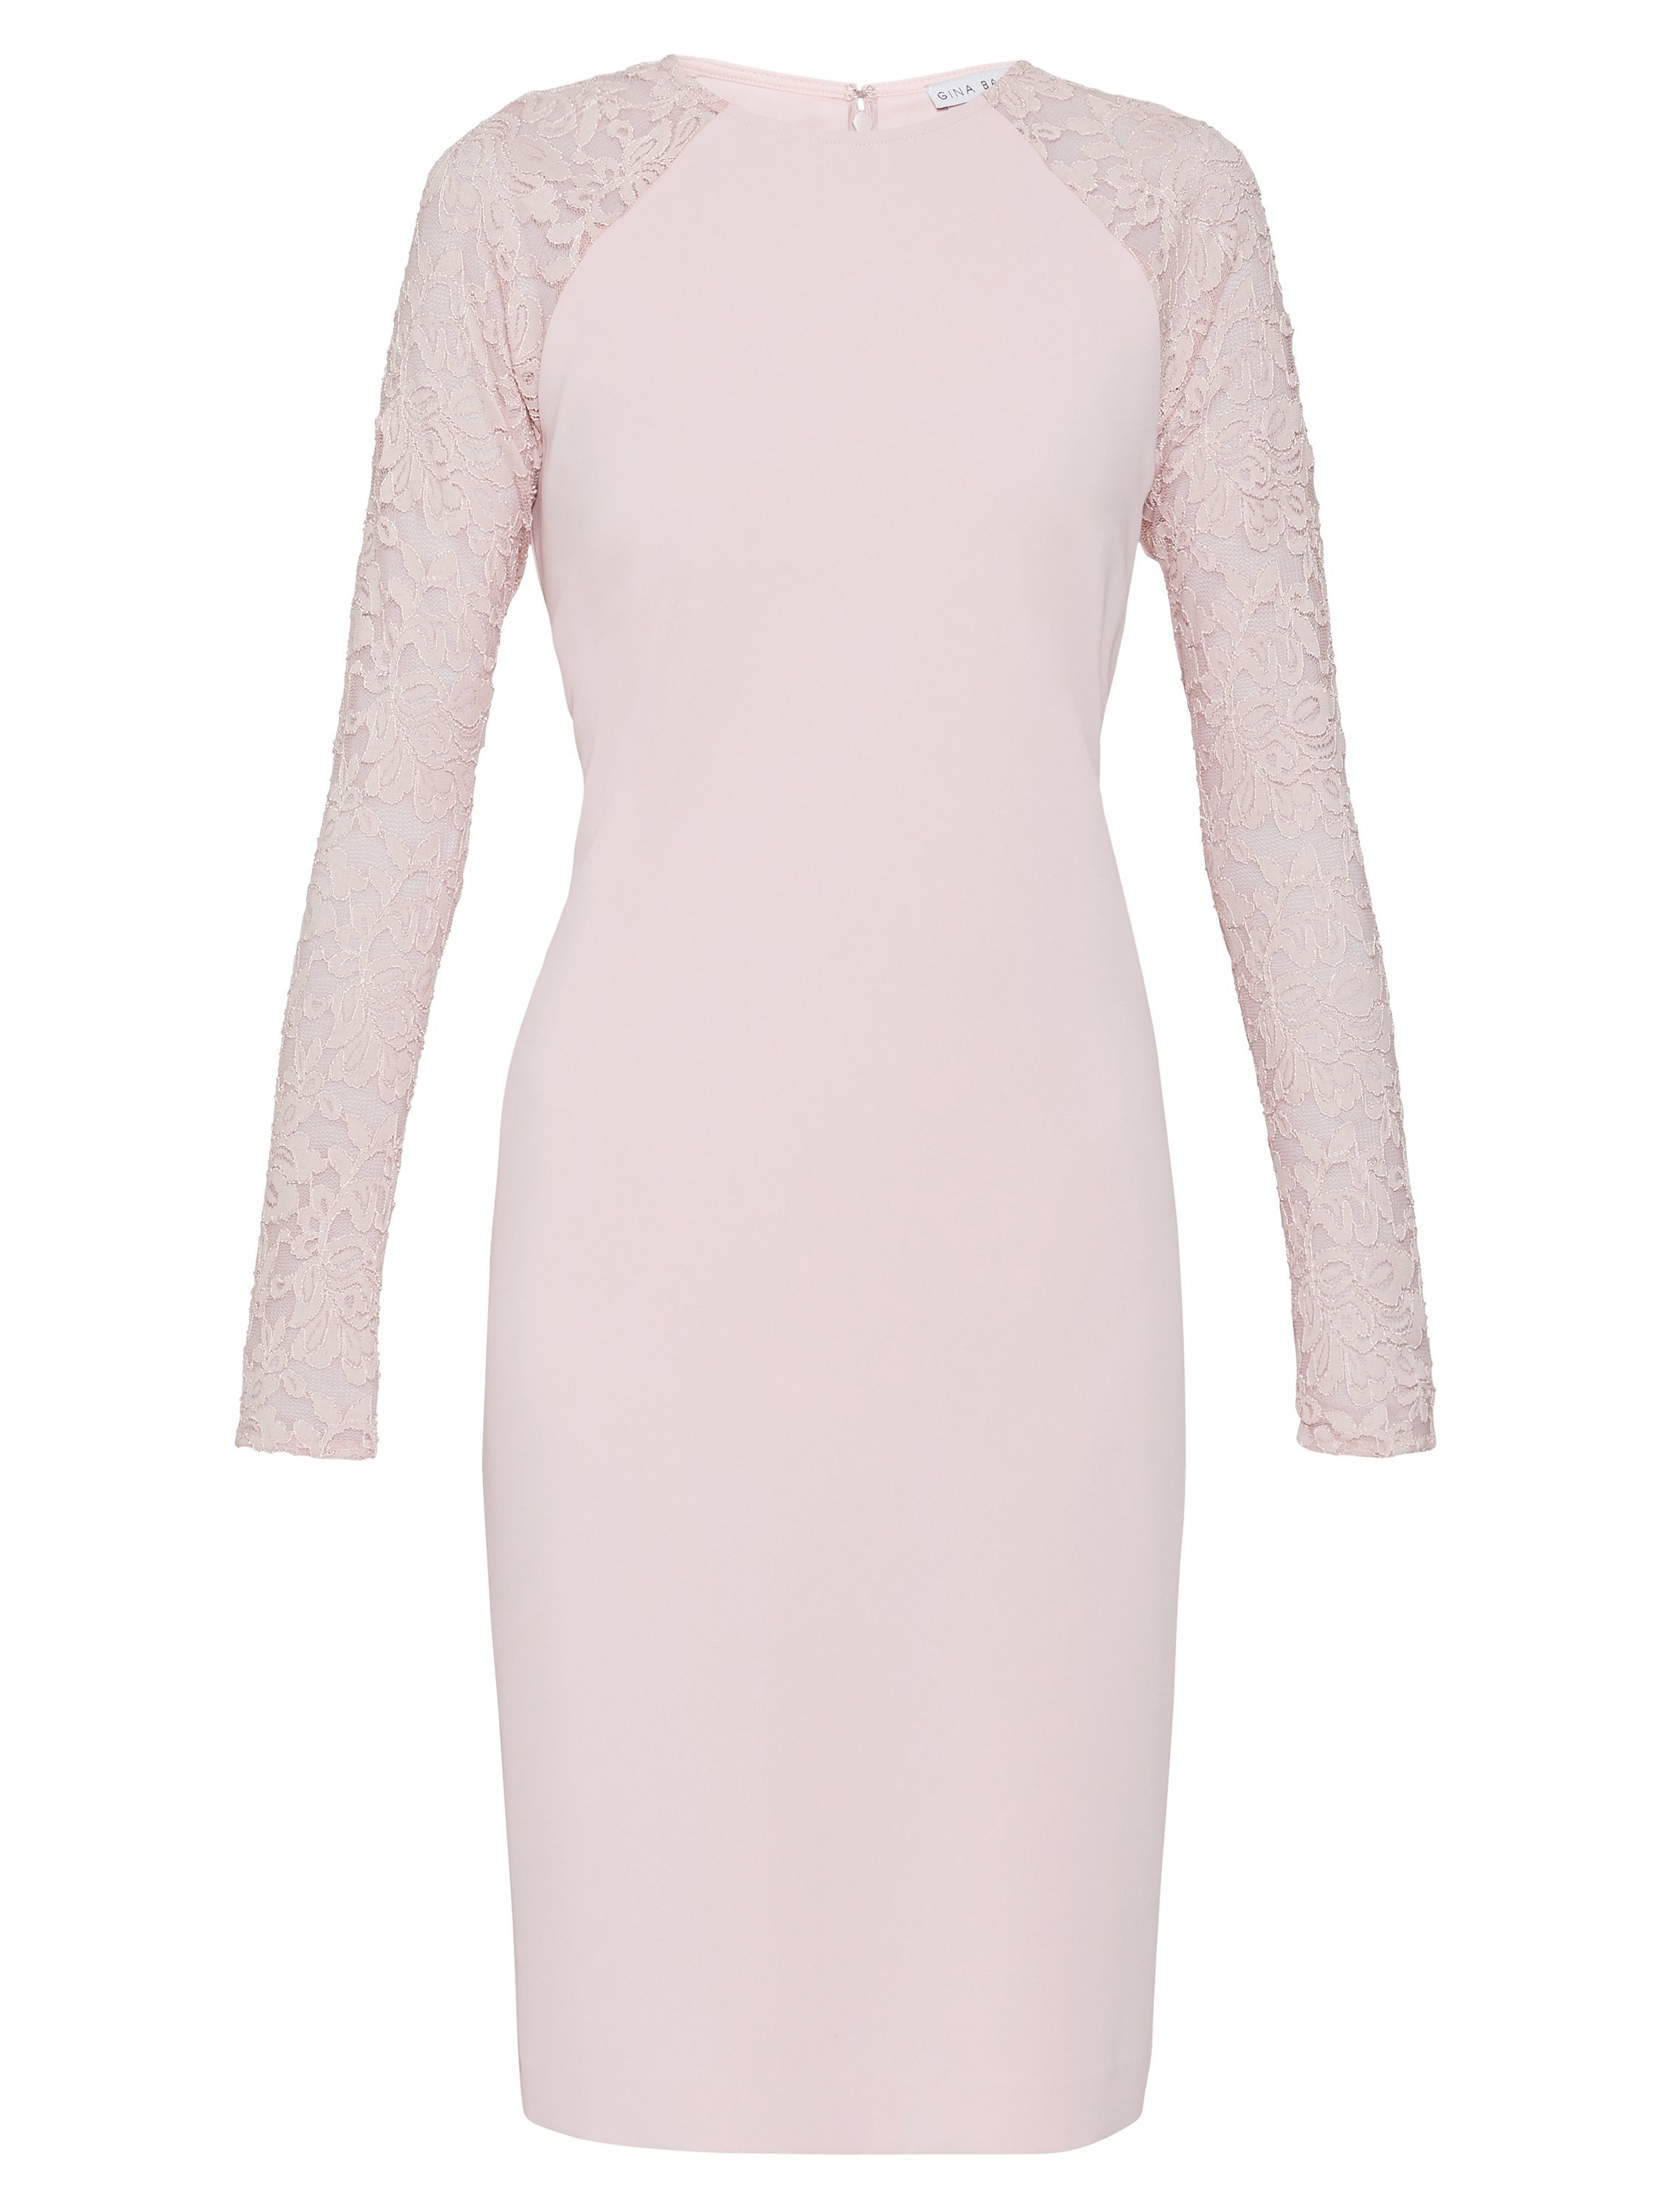 Gina Bacconi presents its stunning crepe and lace dress. This perfect occasionwear piece is comprised of a classic shift dress with sheer dainty floral lace sleeves. This beautiful dress is perfect for a summer party or special occasion. The dress is partially lined and fastens using a concealed back zip.